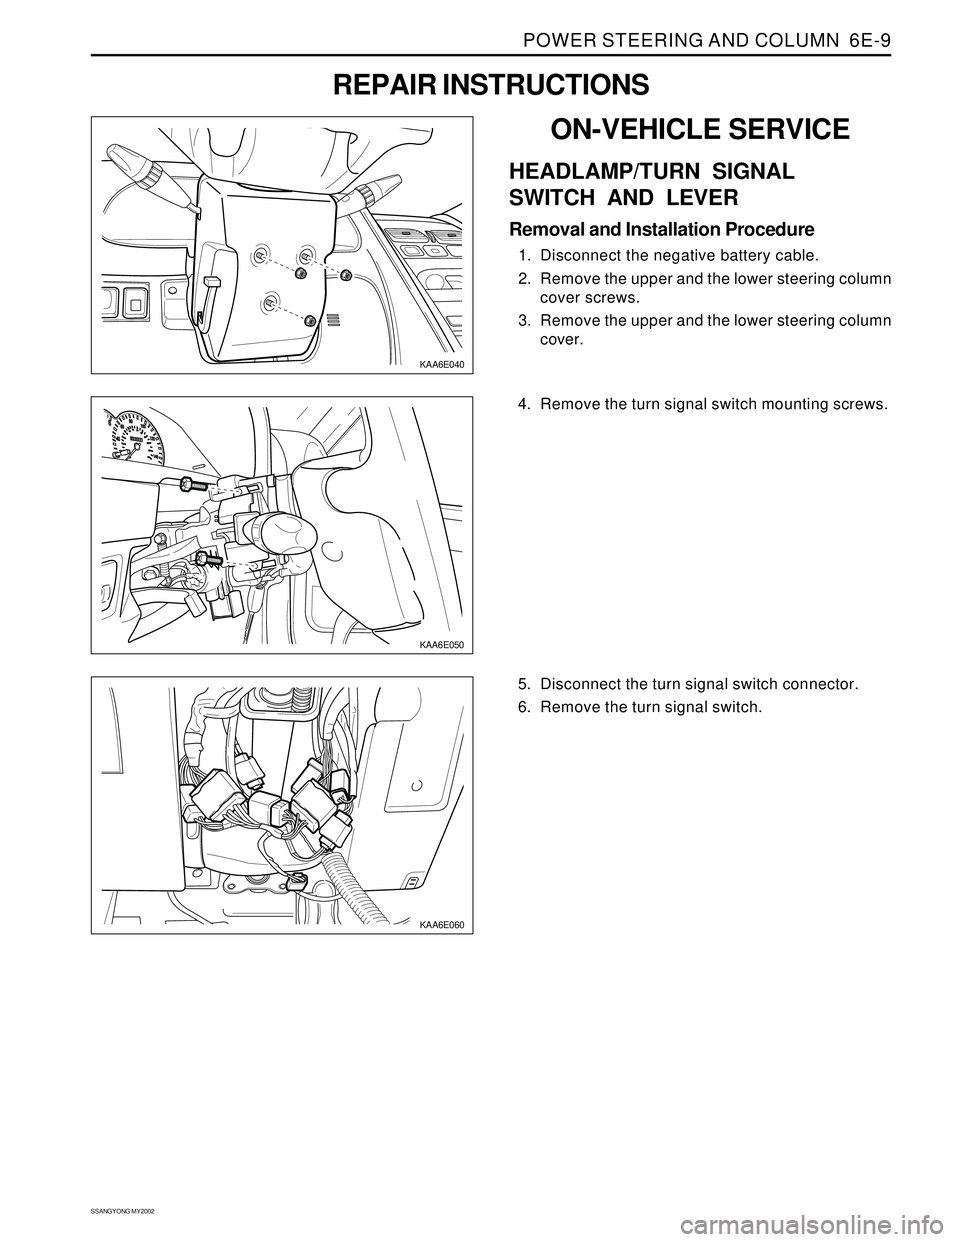 SSANGYONG KORANDO 1997  Service Repair Manual POWER STEERING AND COLUMN  6E-9
SSANGYONG MY2002
KAA6E060
KAA6E040
ON-VEHICLE SERVICE
HEADLAMP/TURN SIGNAL
SWITCH AND LEVER
Removal and Installation Procedure
1. Disconnect the negative battery cable.